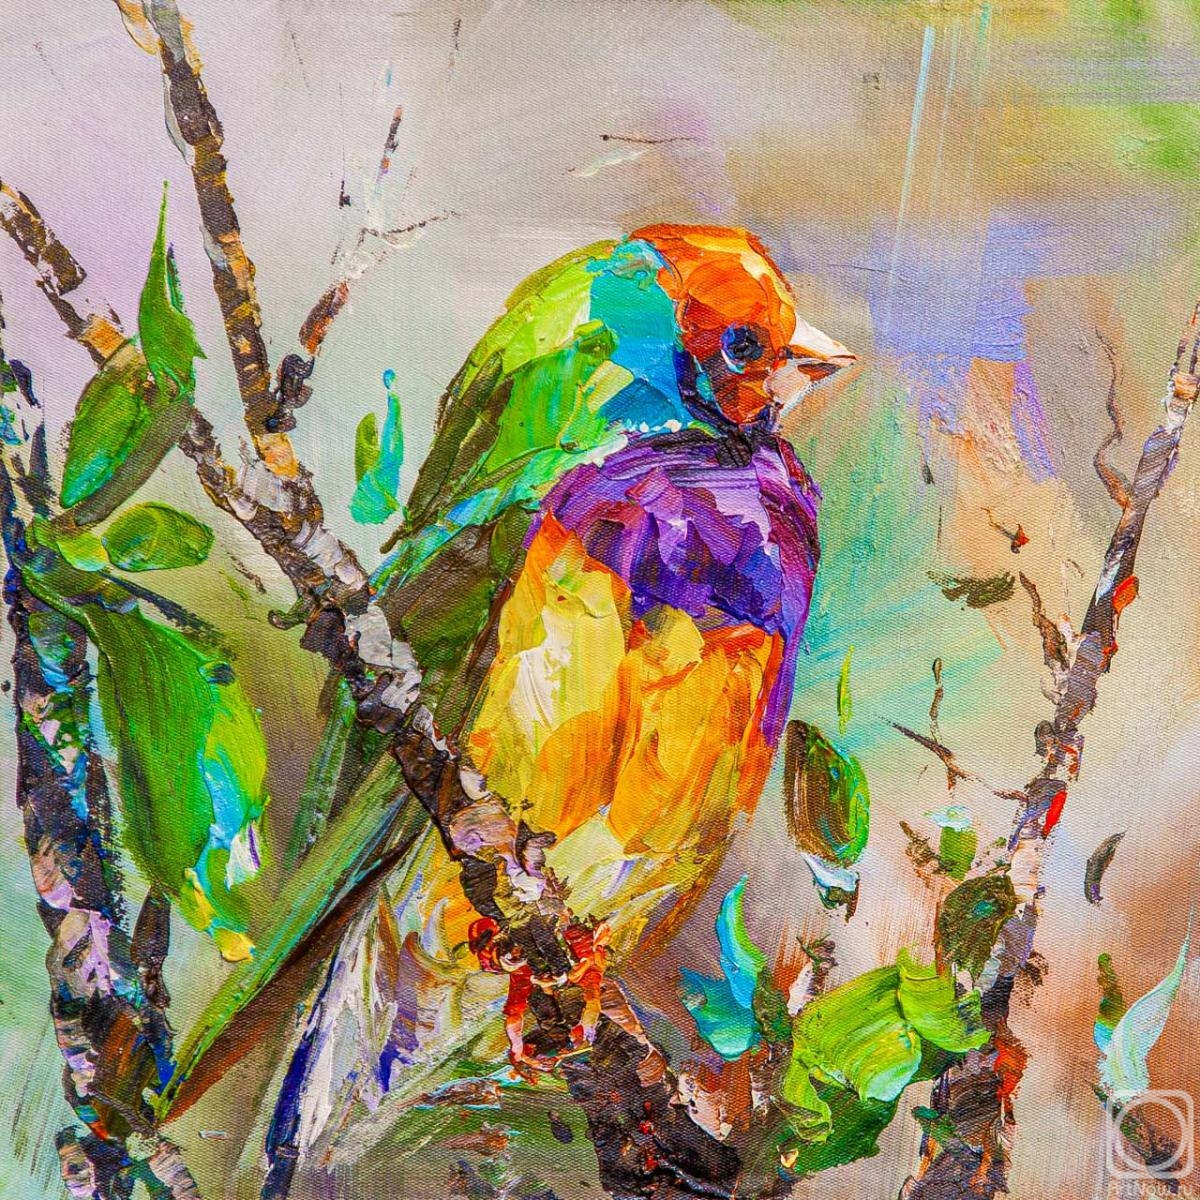 Rodries Jose. Colorful finch